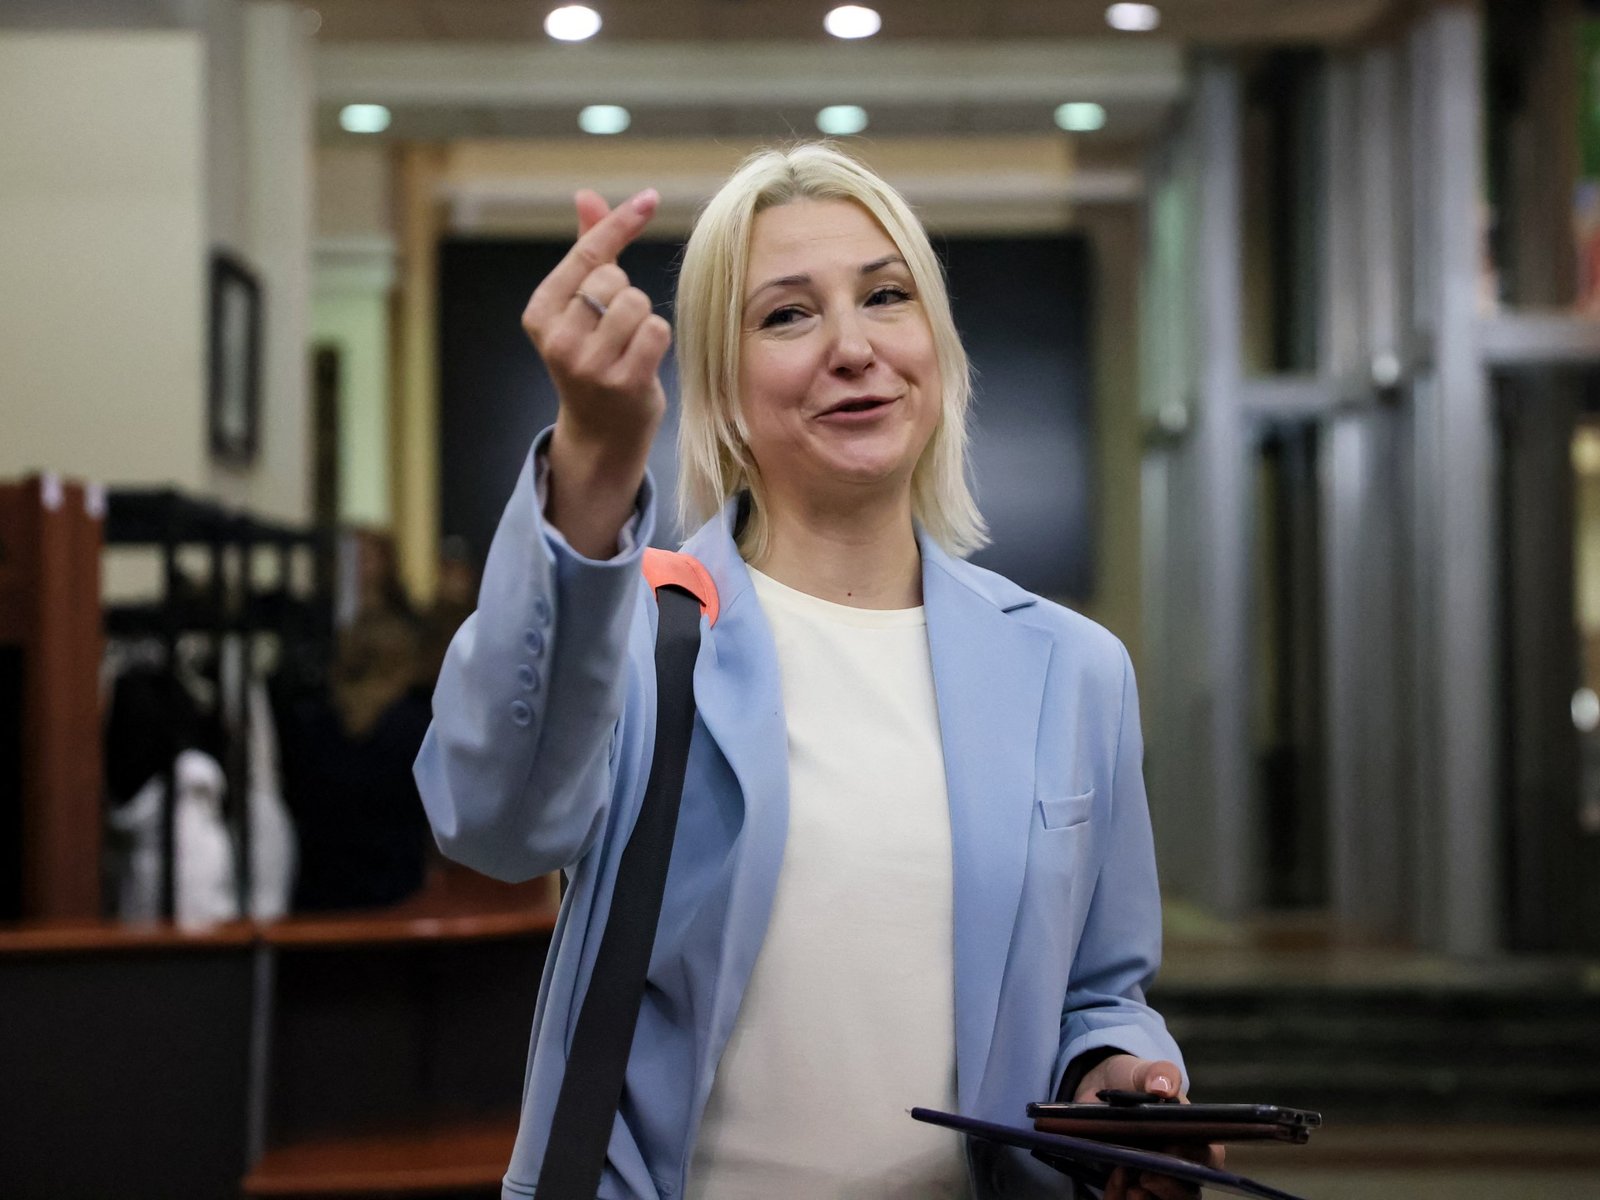 Russia bars ex-journalist Duntsova from running in presidential election | Elections News